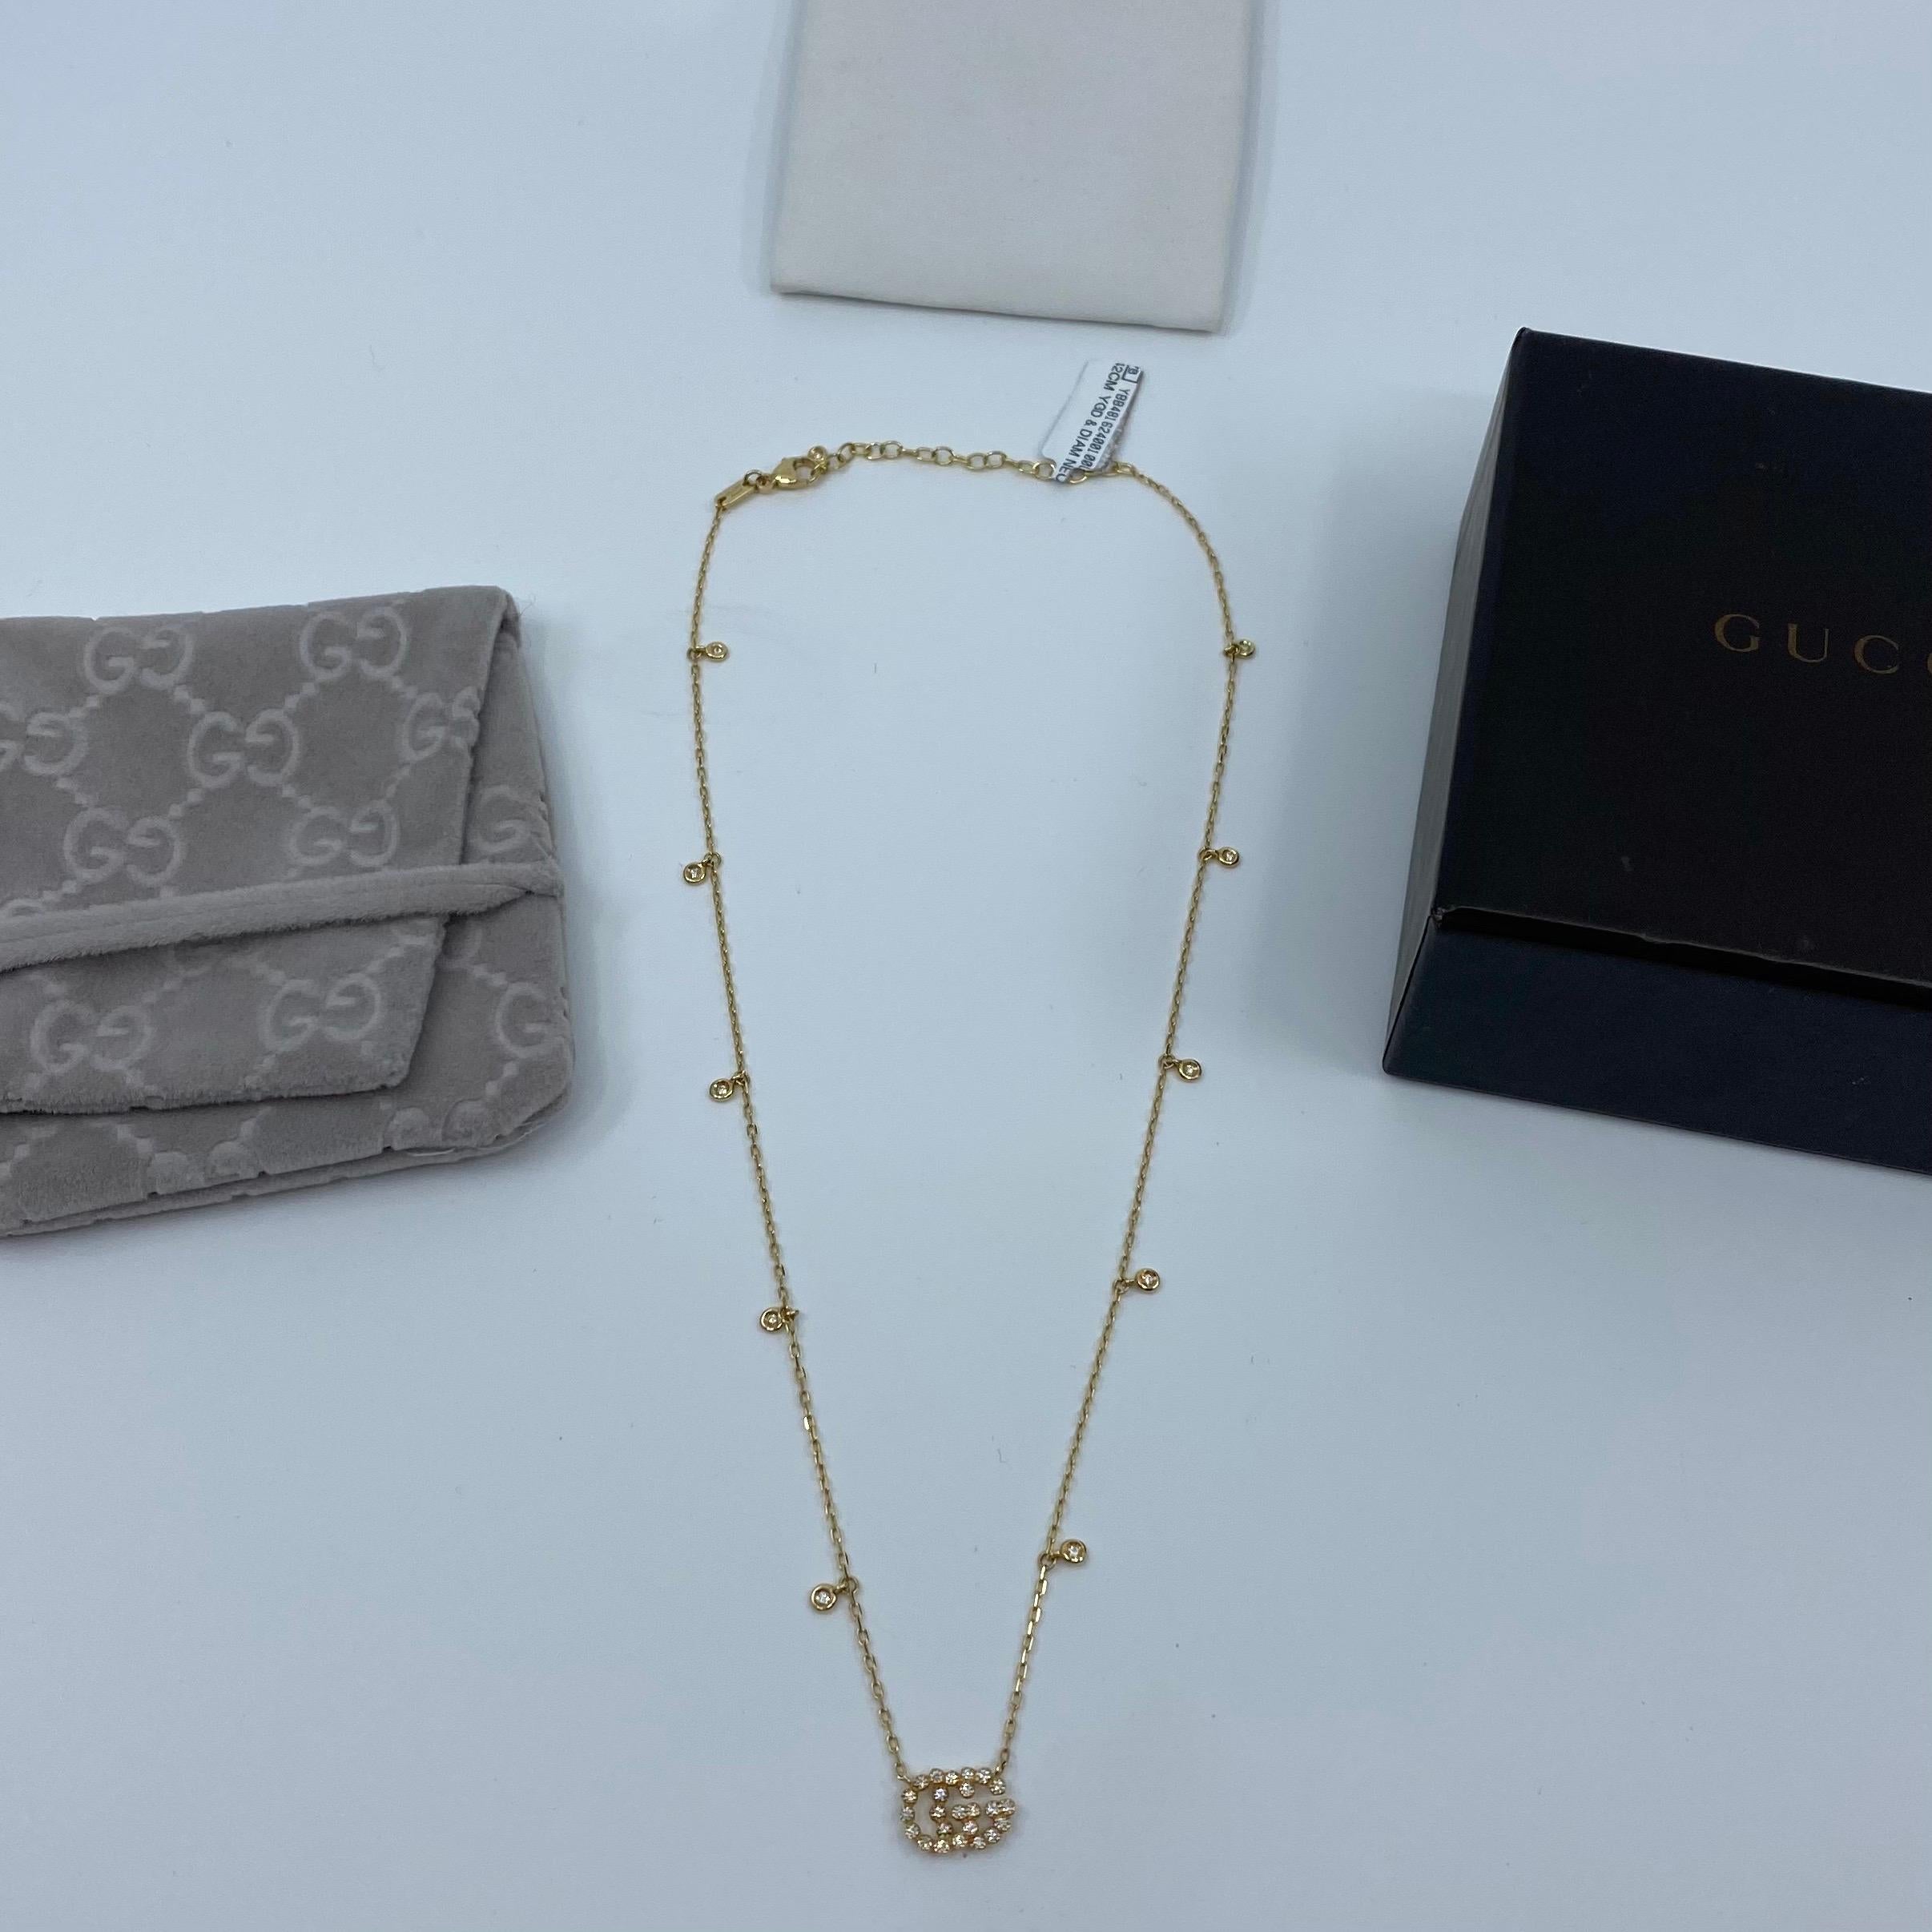 Gucci GG Logo Running Diamond Yellow Gold Pendant Necklace.

Fine Gucci necklace with diamond encrusted GG logo and diamonds running up the chain. 
Set in 18k yellow gold with Gucci hallmarks.

Adjustable length necklace. Can be worn between approx